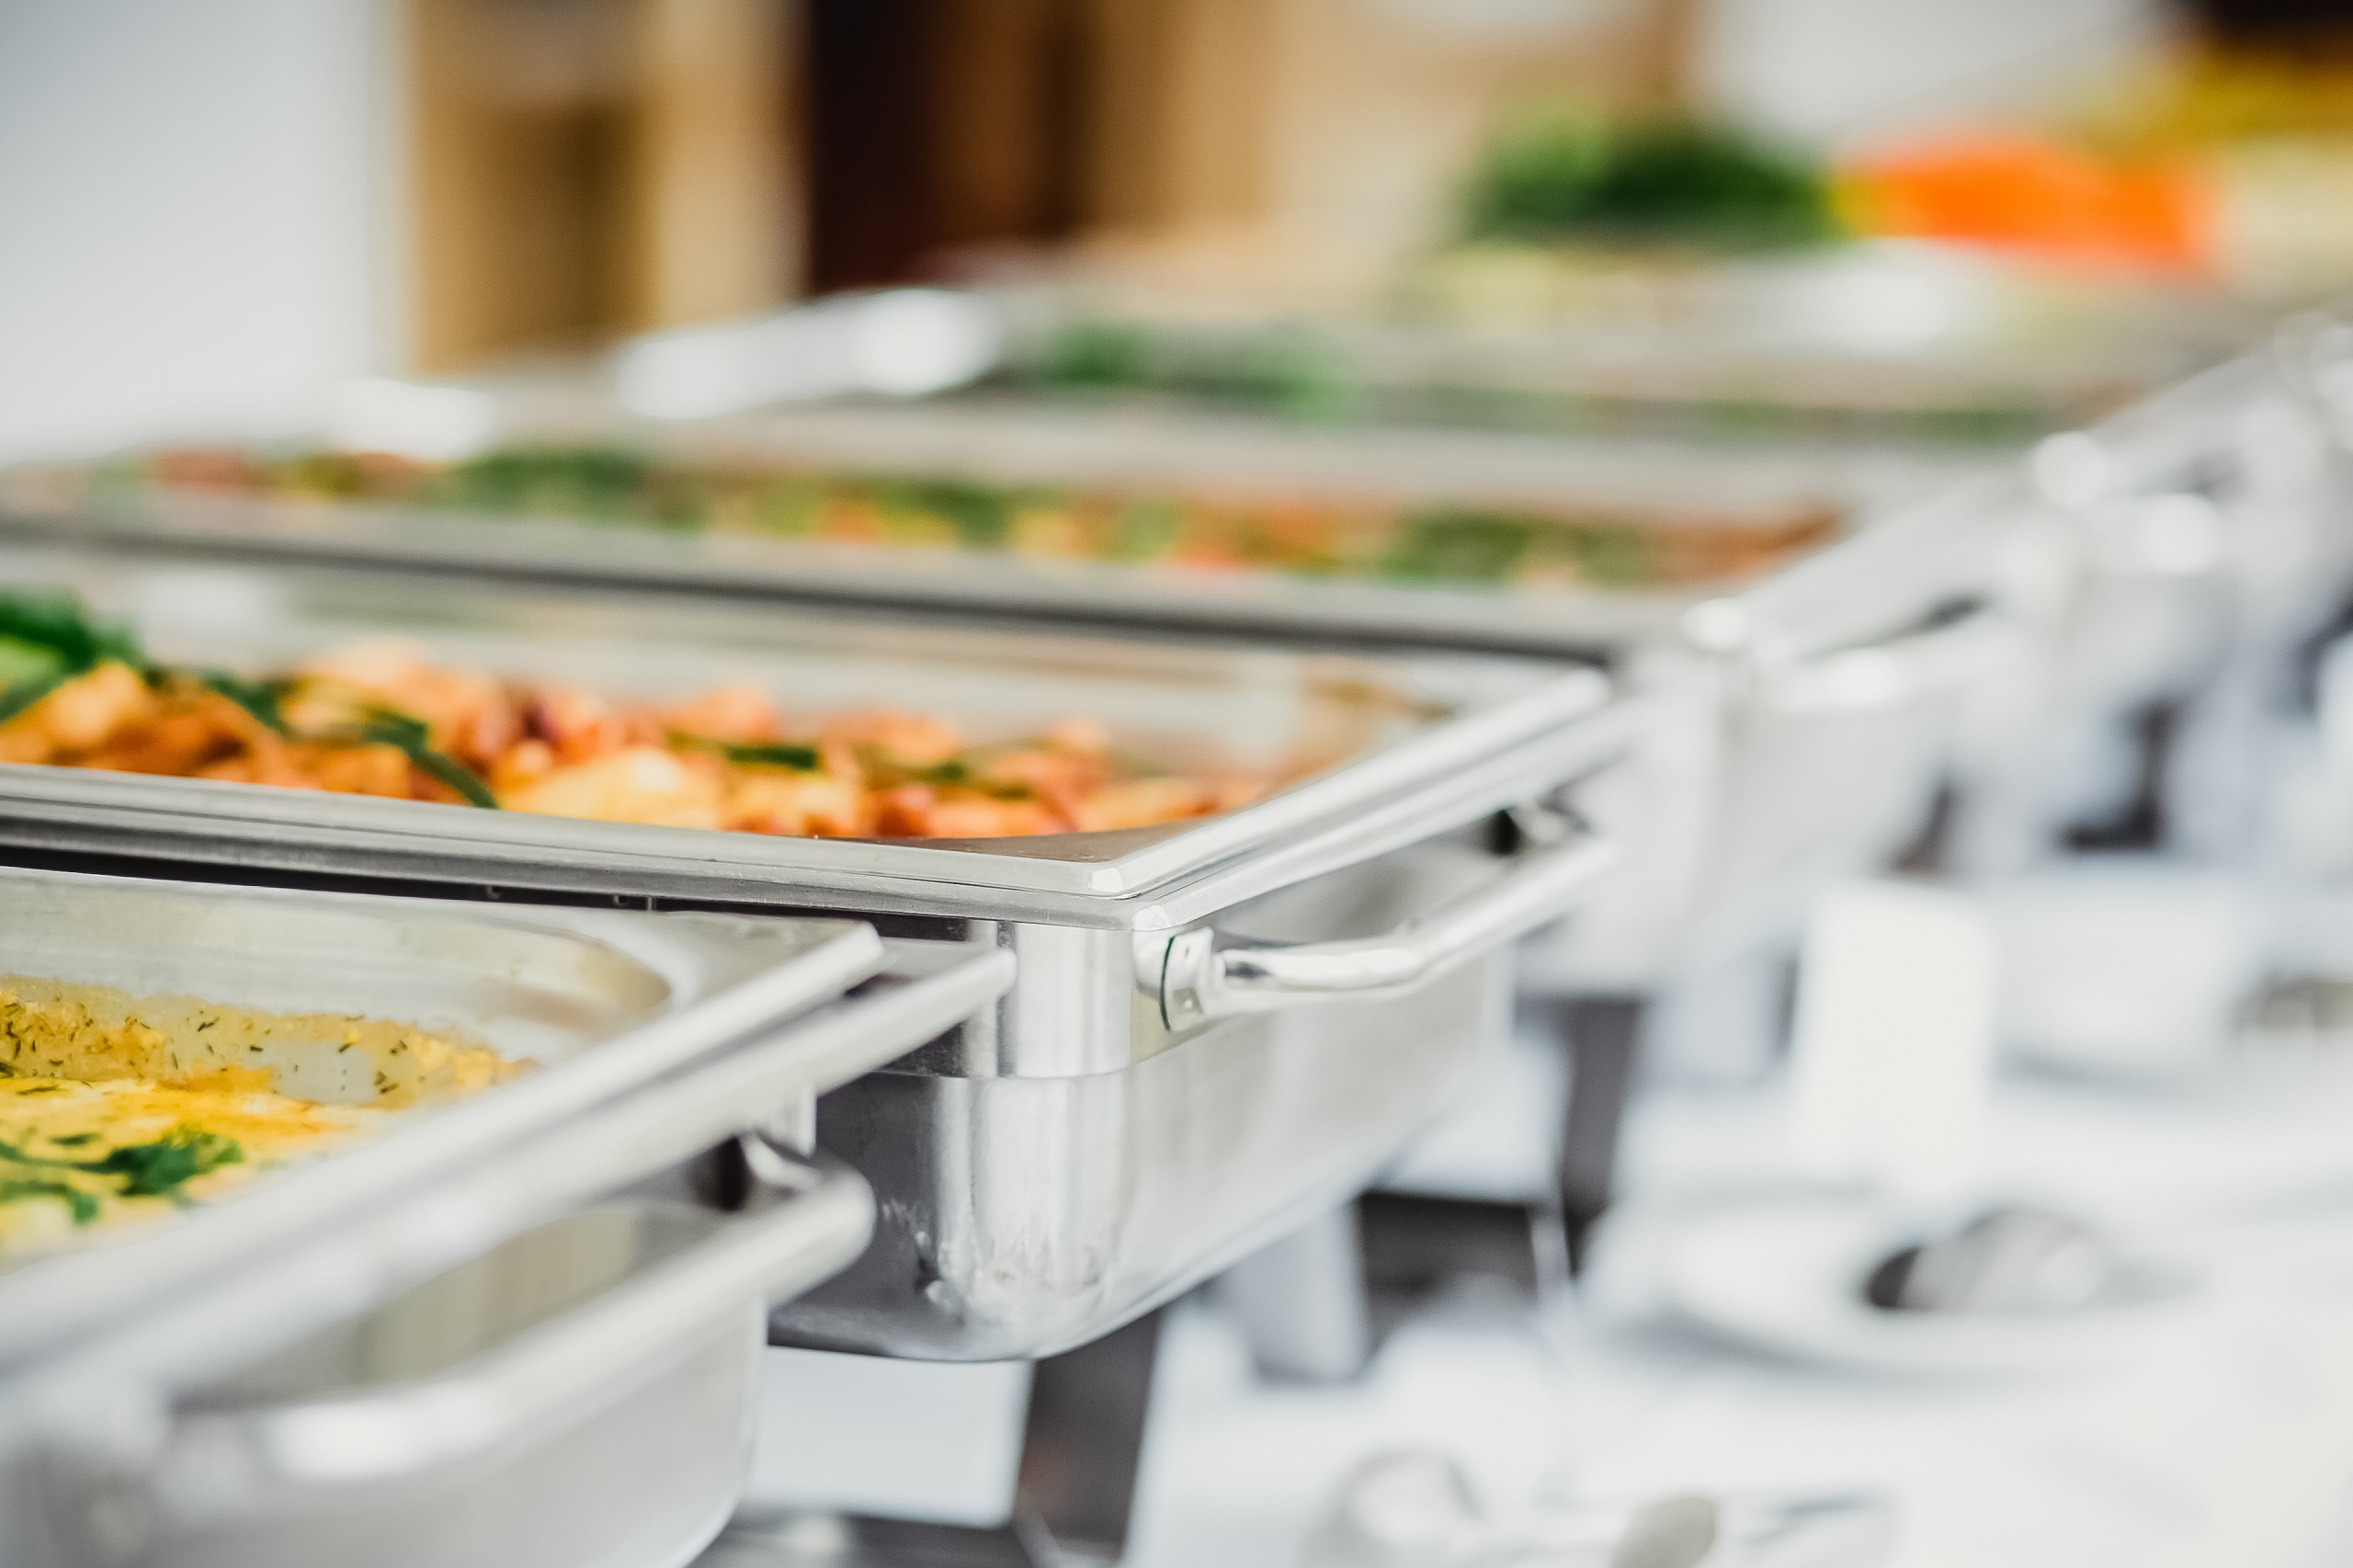 Buffet food trays with food neatly arranged in a row on a long table adourned in an elegant white cloth and several plates with silverware depicting a catered food event such as a wedding or birthday.